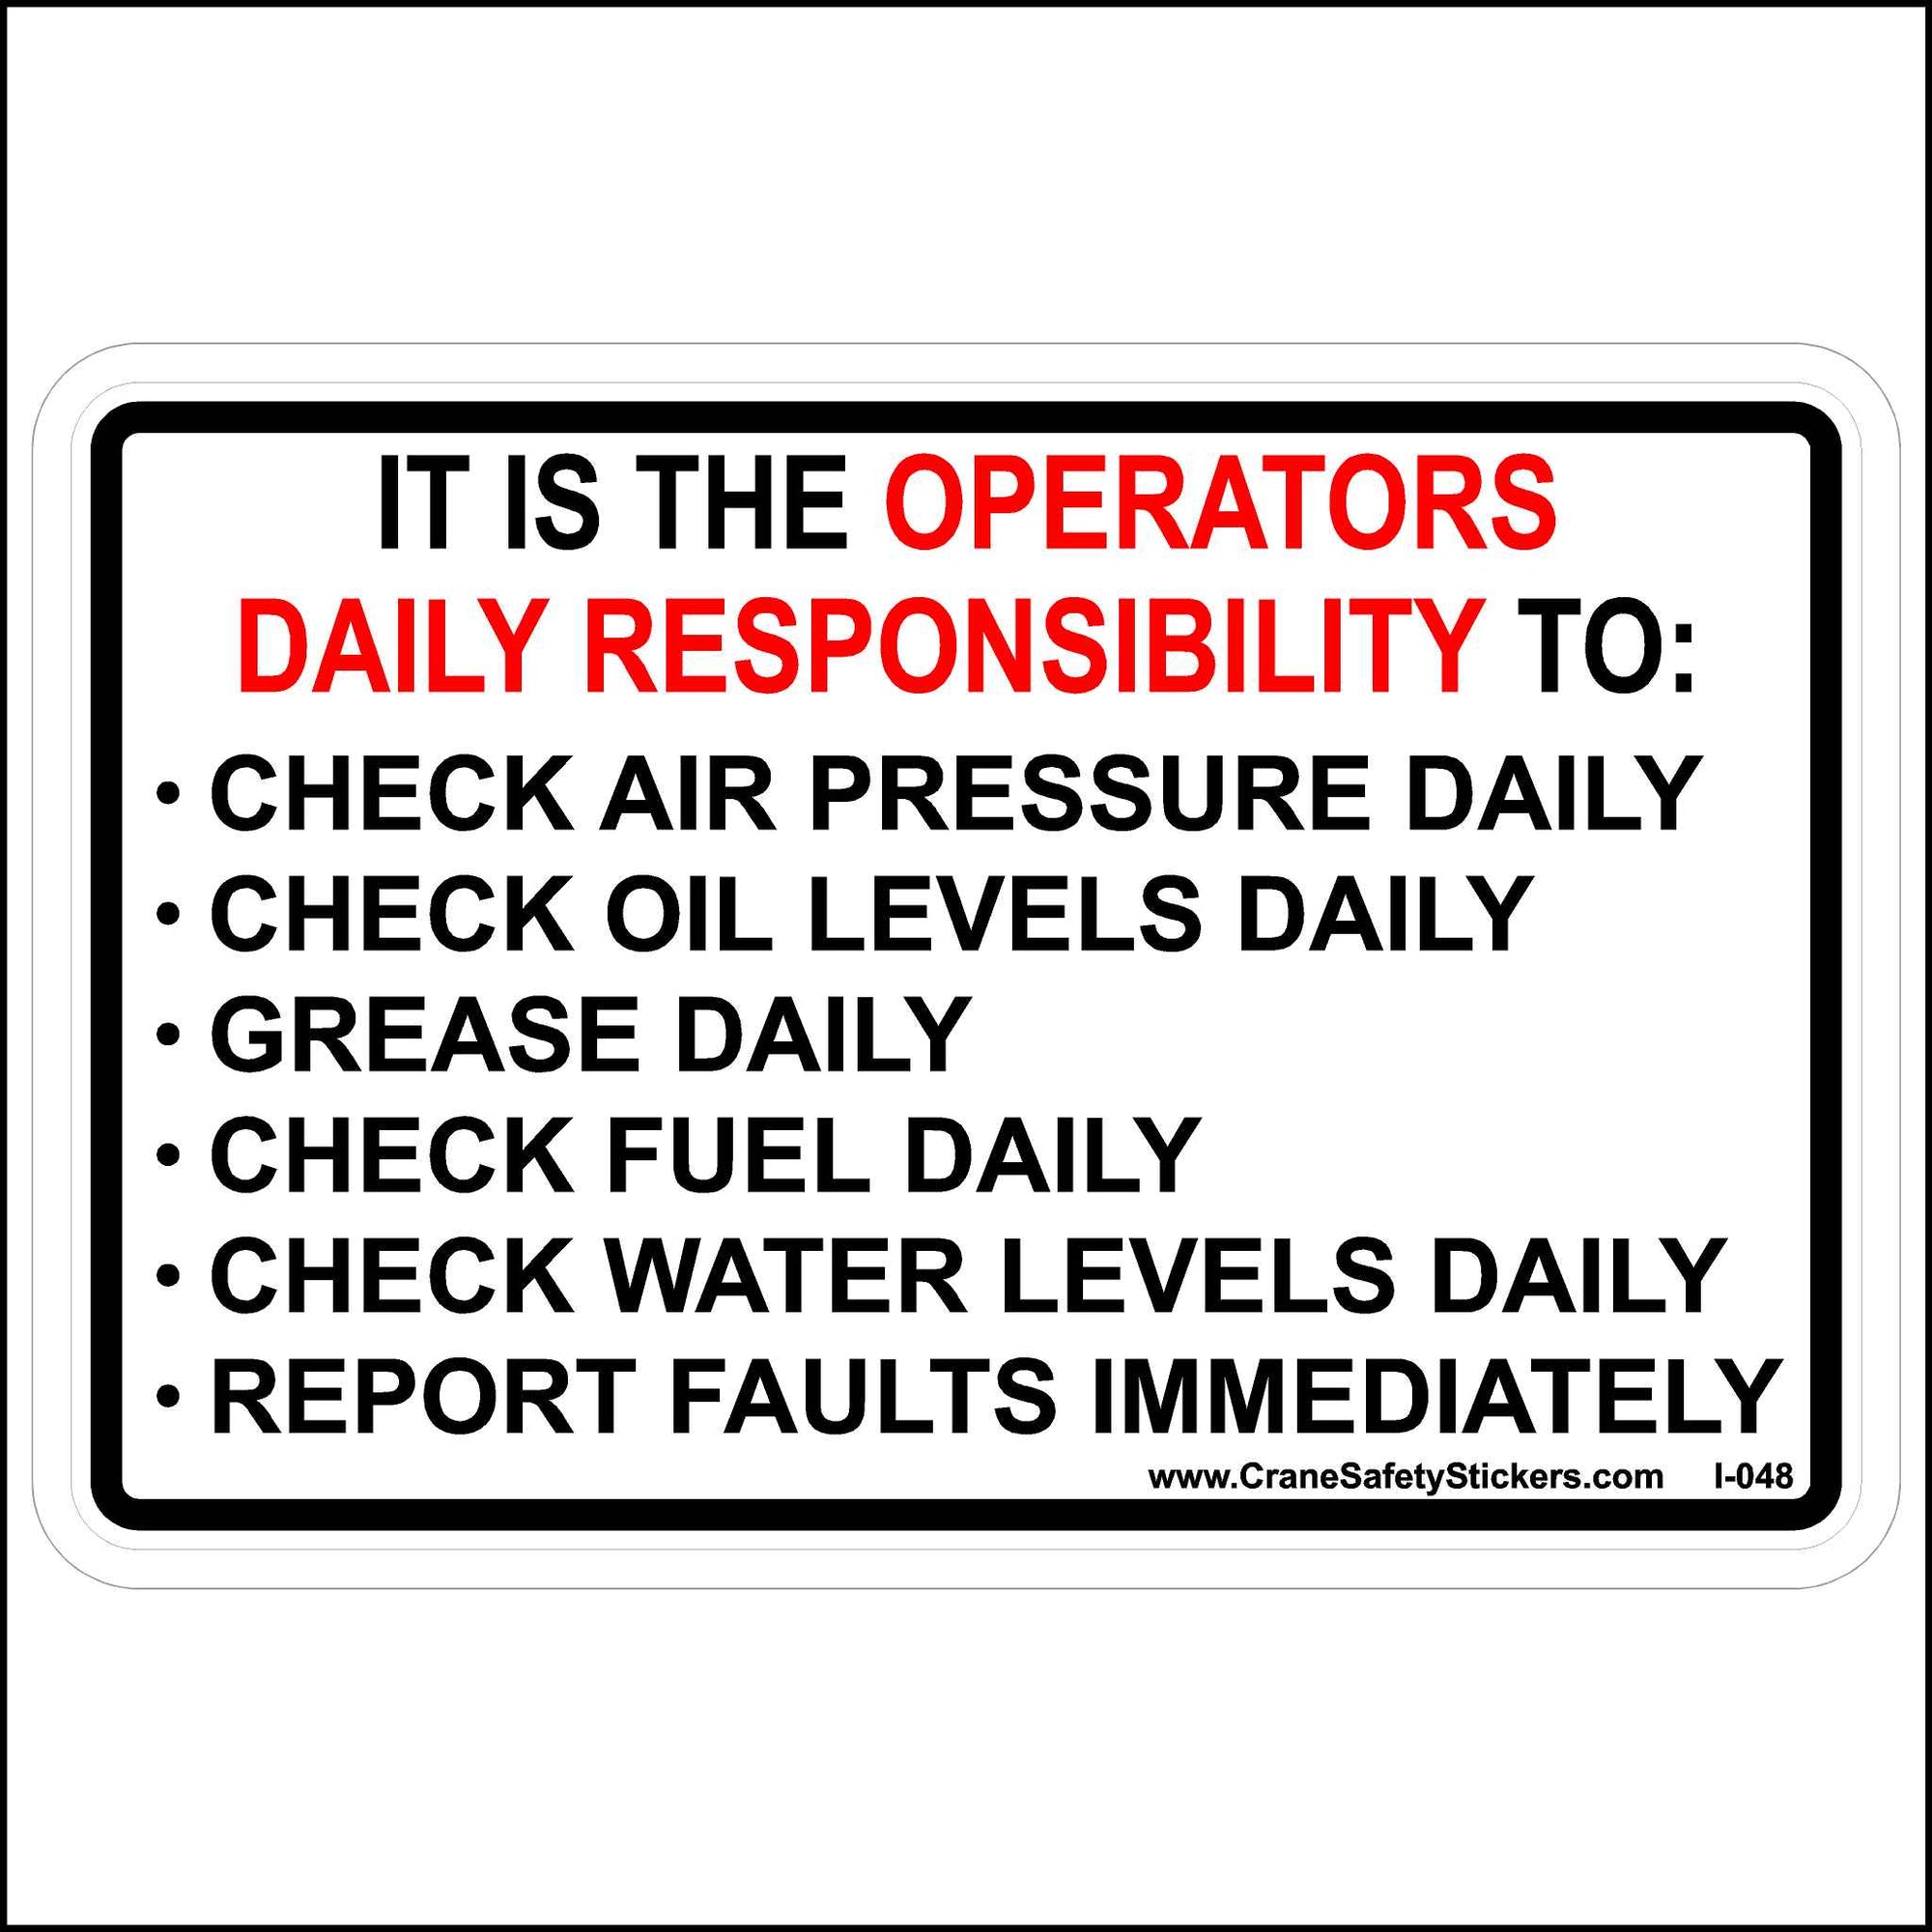 This, It Is the Operator's Daily Responsibility Sticker is Printed With. IT IS THE OPERATORS DAILY RESPONSIBILITY TO:  • CHECK AIR PRESSURE DAILY • CHECK OIL LEVELS DAILY • GREASE DAILY • CHECK FUEL DAILY • CHECK WATER LEVELS DAILY • REPORT FAULTS IMMEDIATELY.